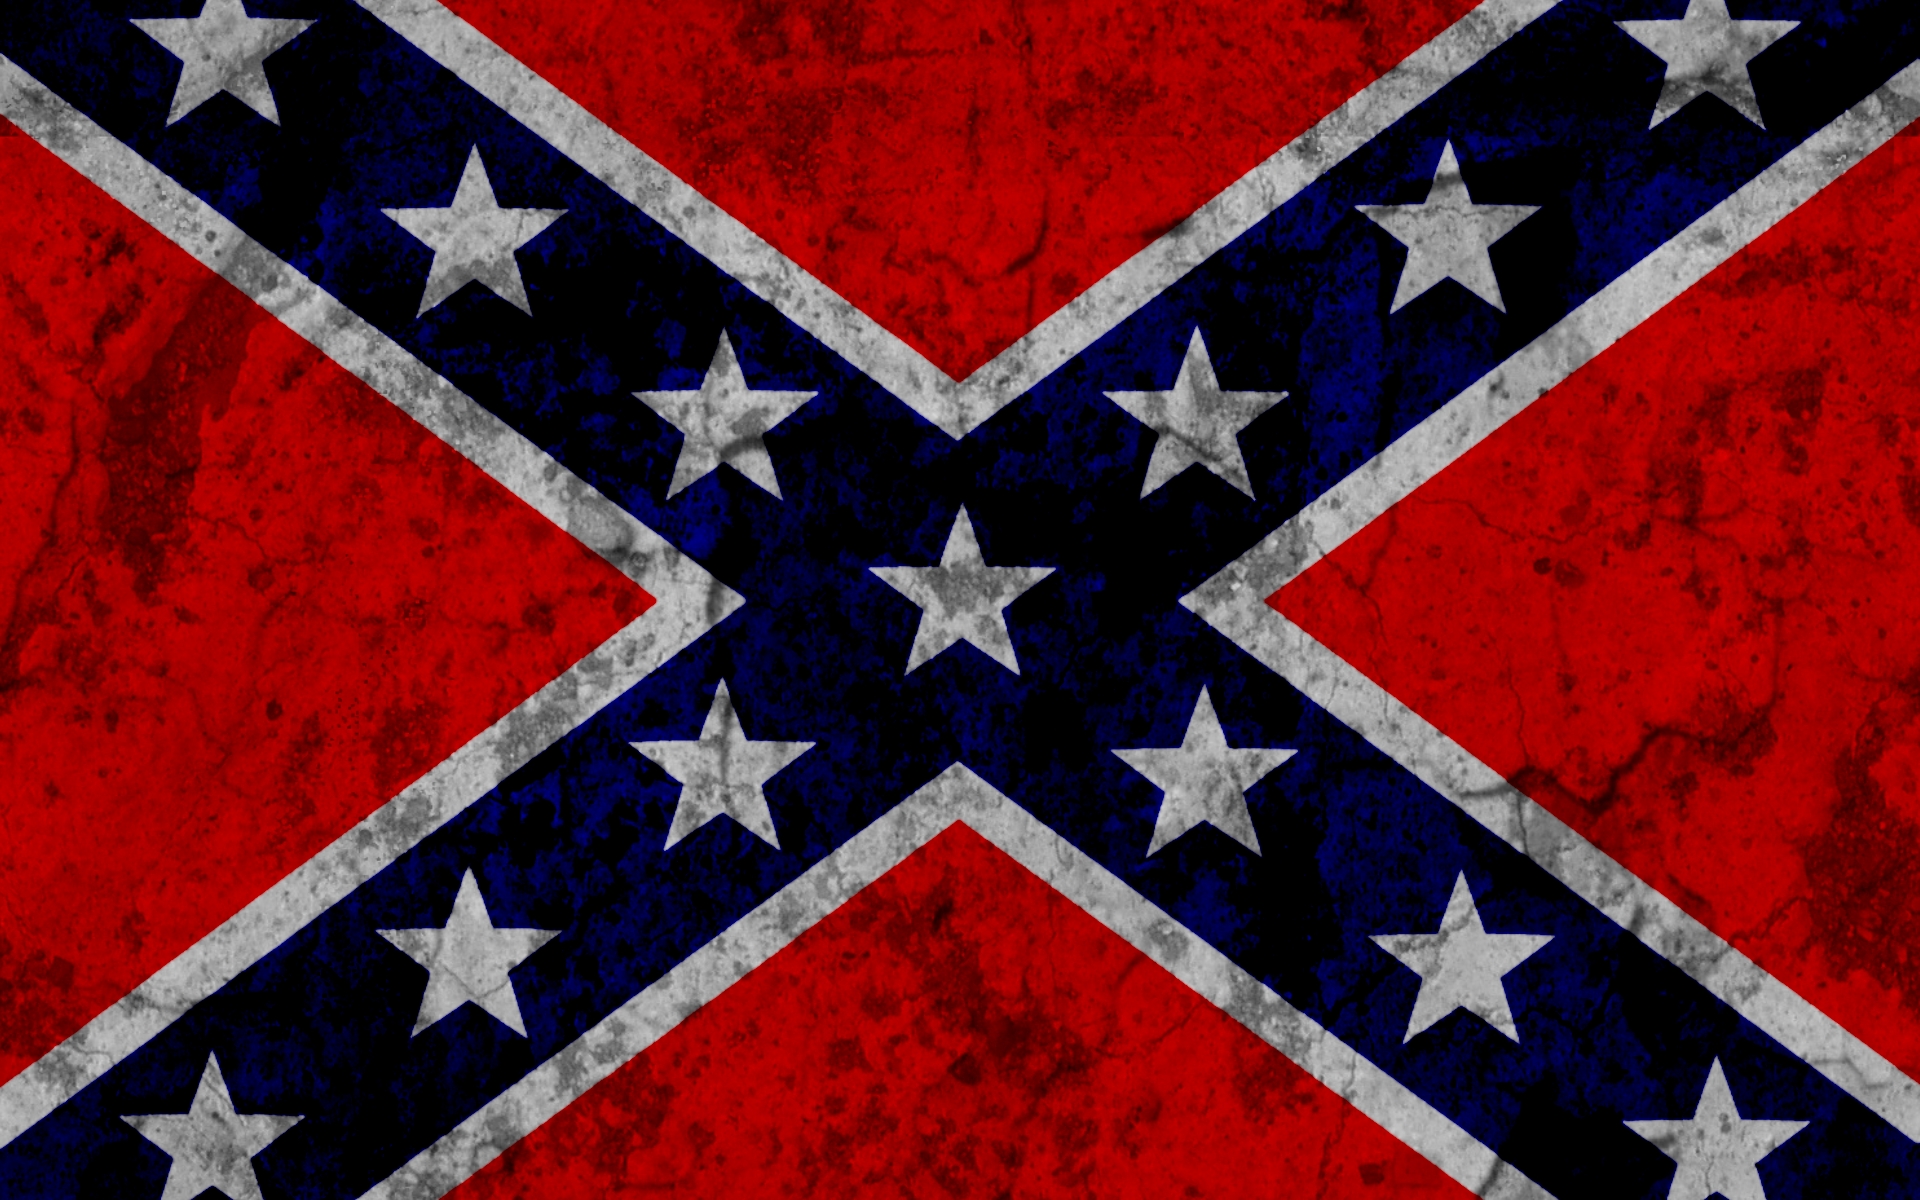 Pm41 Rebel Flag Wallpaper For Puter Awesome